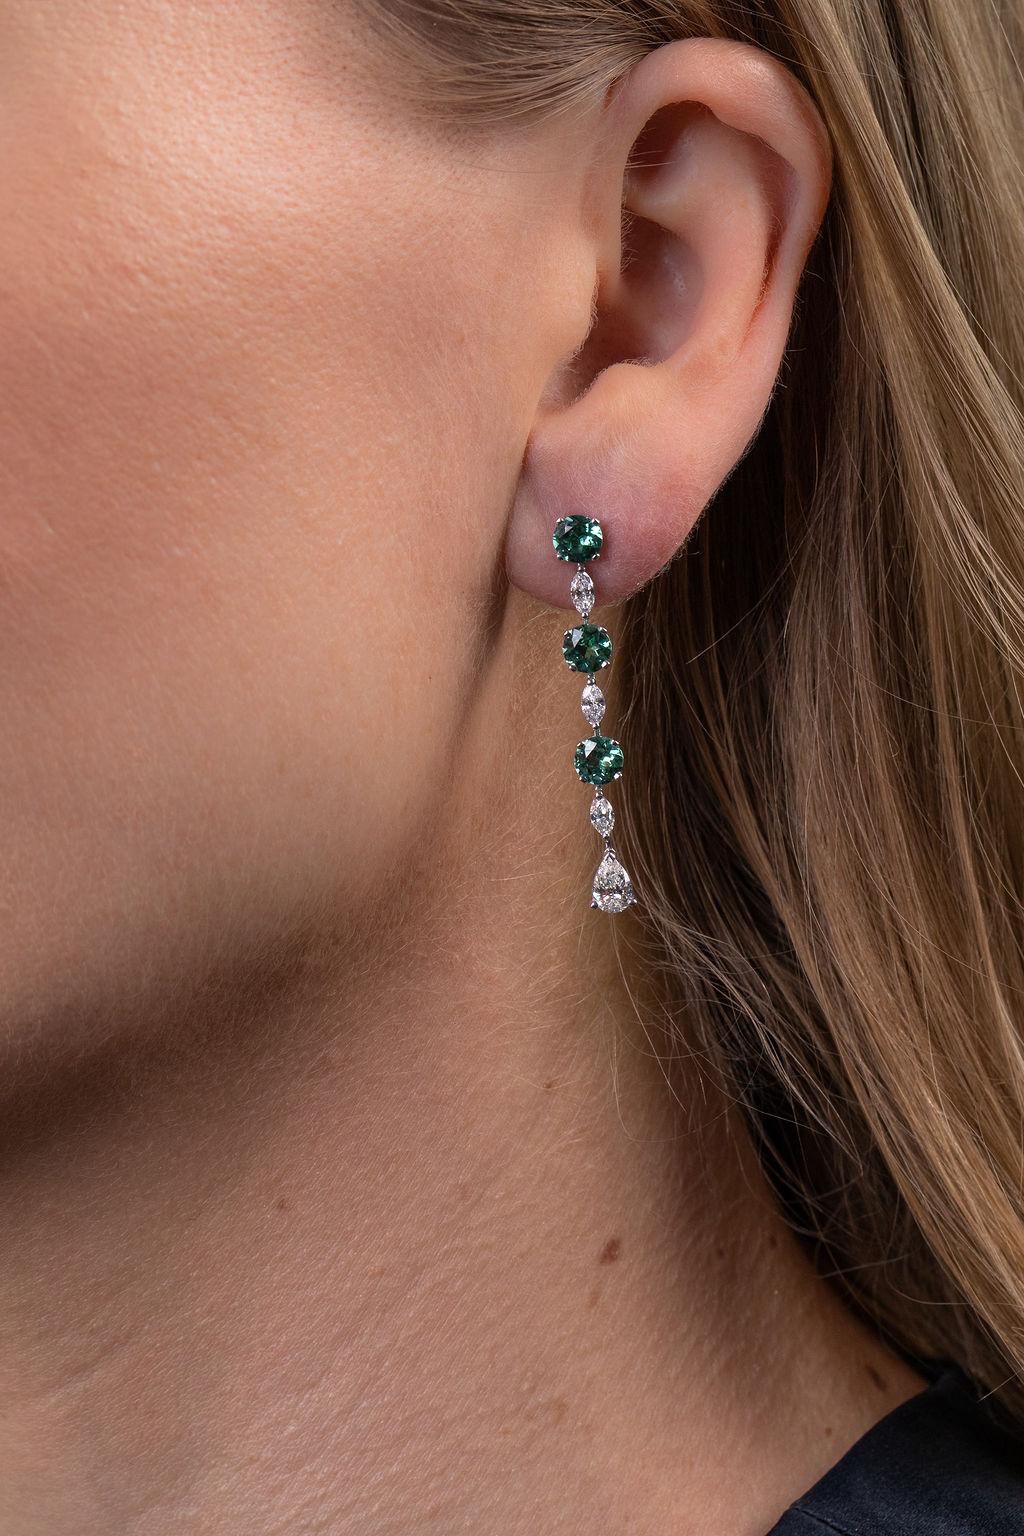 Fun, modern, and bold drop earrings featuring exquisite green tourmaline and marquise and pear-shaped diamonds.  Set in 18k white gold.
(Approx. 1.43 carats of diamonds and 2.48 carats of green tourmalines)